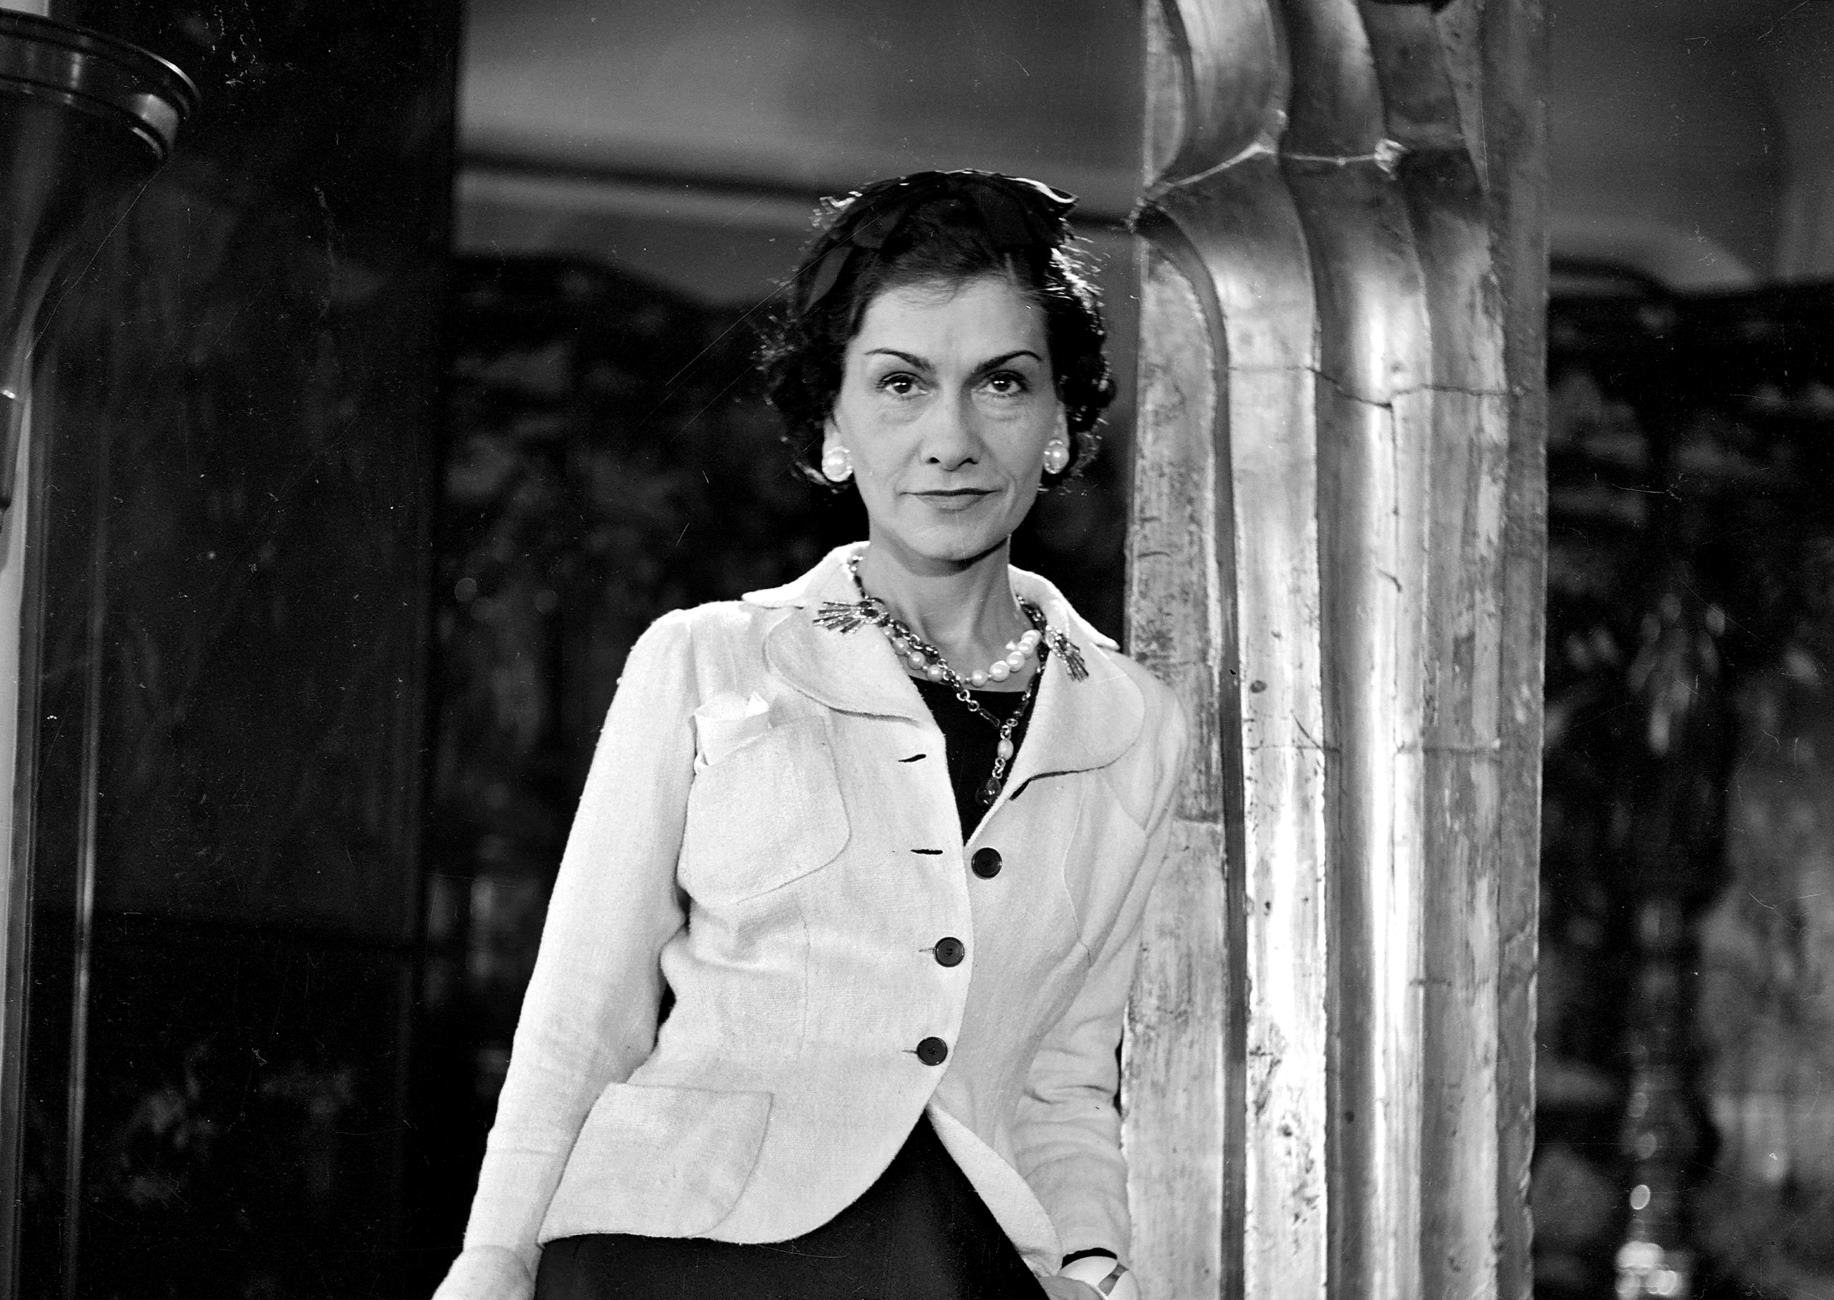 coco chanel biography book